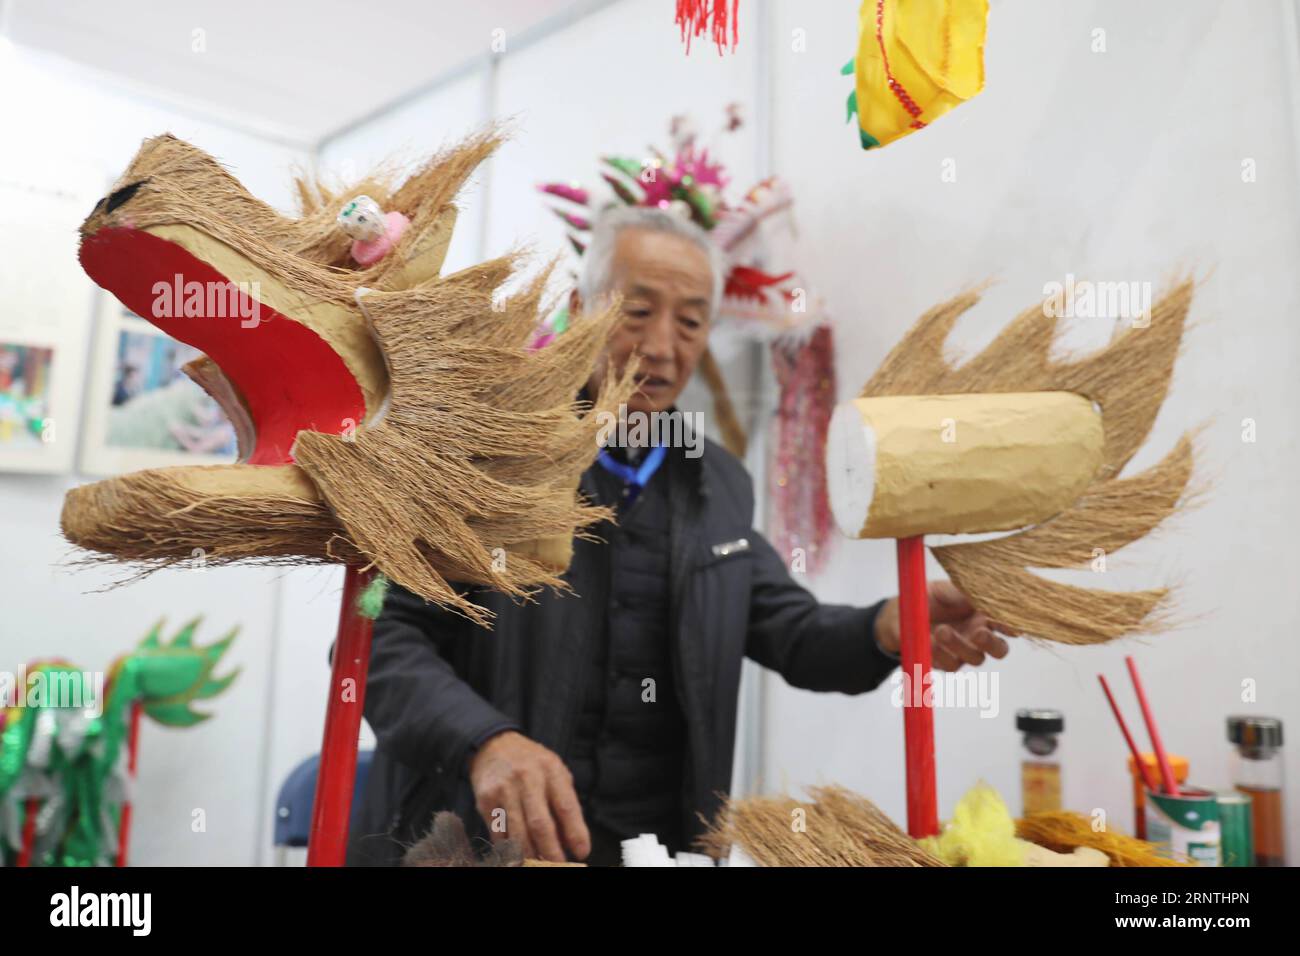 (171110) -- XI AN, Nov. 10, 2017 -- A successor displays stage property of dragon dance during a traditional handicrafts exhibition in Xi an, northwest China s Shaanxi Province, Nov. 10, 2017. Over 100 successors of intangible cultural heritages and folk handicraftsmen displayed their skills and interacted with visitors at the exhibition that kicked off on Friday. )(mcg) CHINA-XI AN-TRADITIONAL HANDICRAFTS EXHIBITION (CN) ChenxChangqi PUBLICATIONxNOTxINxCHN Stock Photo